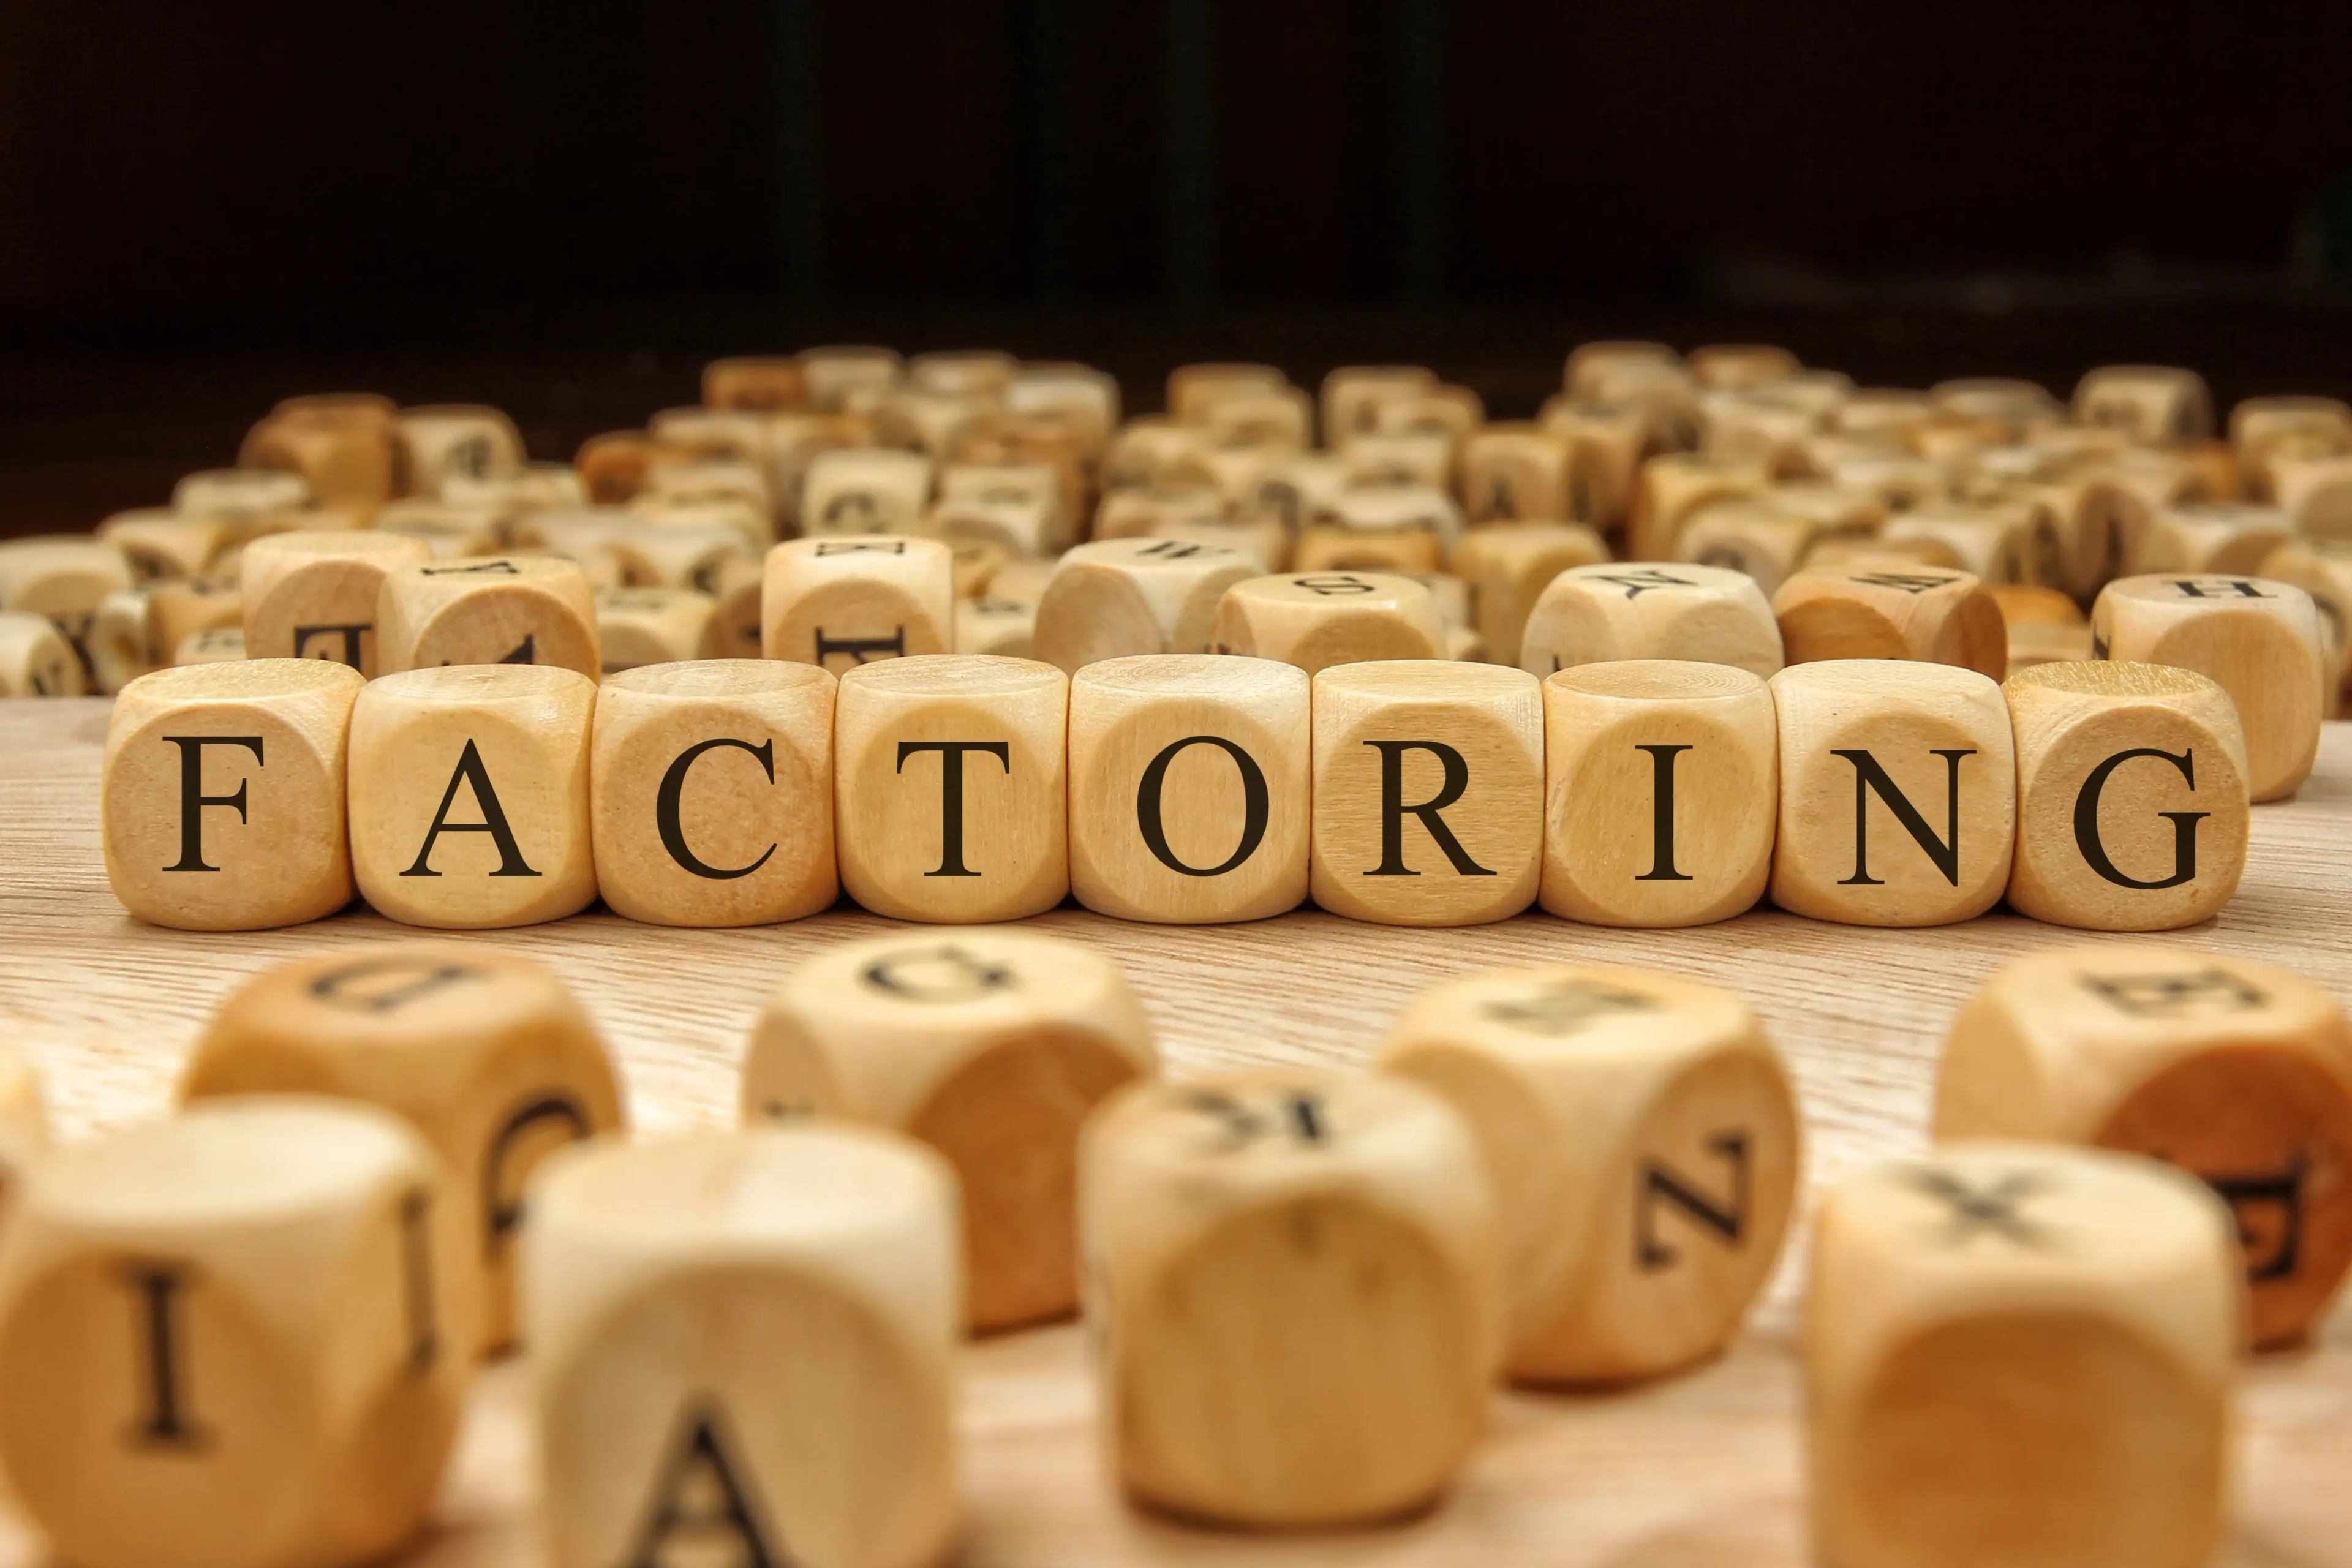 Factoring spelled out with wooden blocks